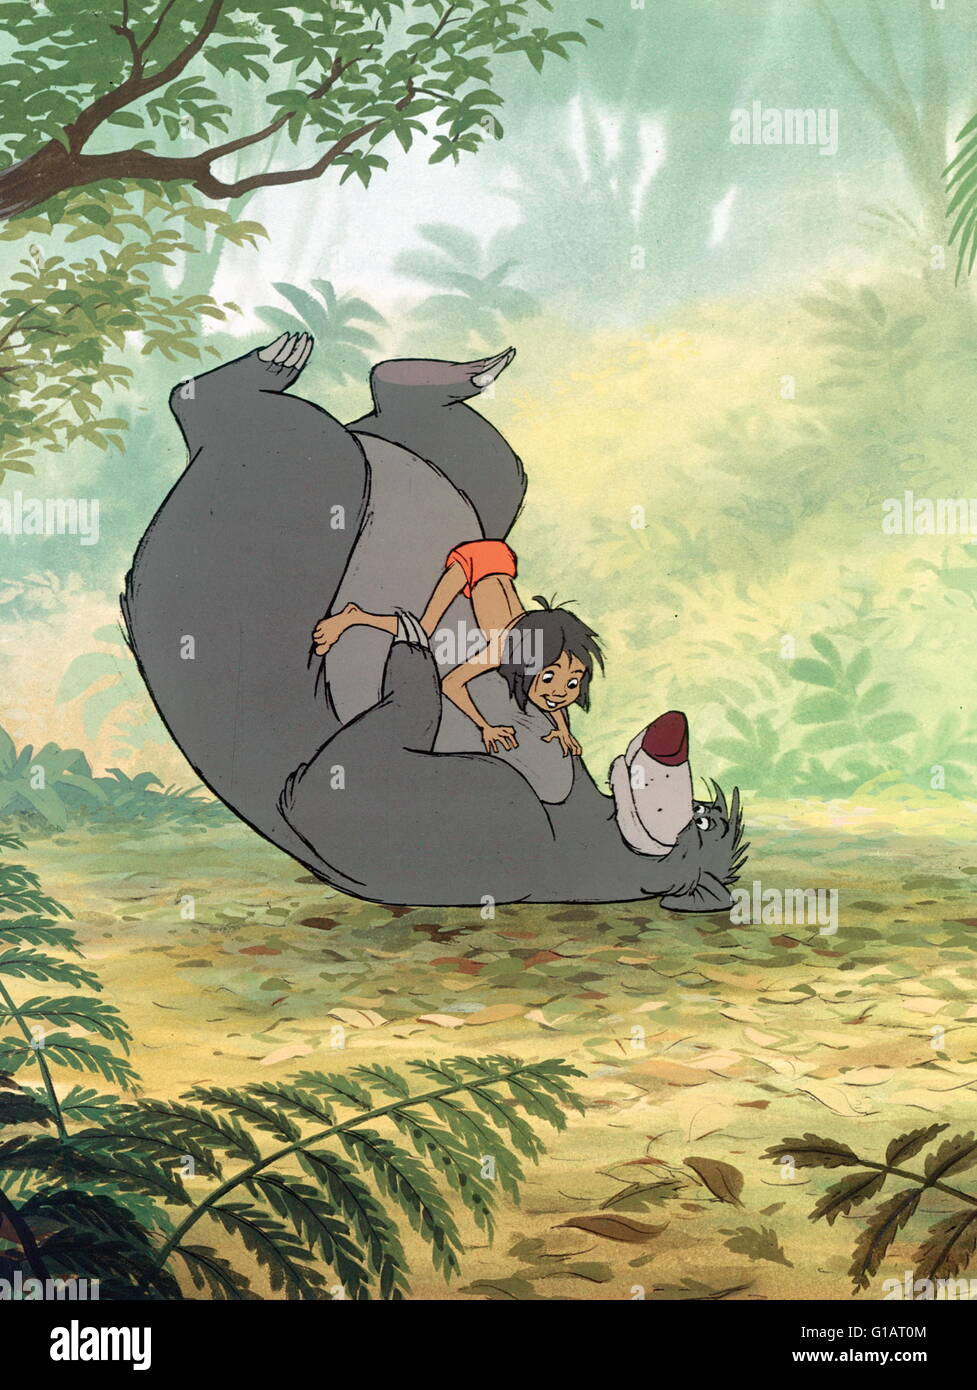 RELEASE DATE: October 18, 1967 DIRECTOR: Wolfgang Reitherman STUDIO: Walt Disney Productions PLOT: Disney animation inspired by Rudyard Kiplings 'Mowgli' story. Mowgli is a boy who has been raised by wolves in the Indian jungle. When the wolves hear that the fierce tiger, Shere Kahn, is nearby, they decide to send Mowgli to a local 'man tribe'. On his way to the village, Mowgli meets many animal characters in this musical tale. When Shere Kahn learns of Mowgli's presence, he tracks him down PICTURED: voices Phil Harris, Sebastian Cabot, Louis Prima (Credit Image: c Walt Disney Productions/Ente Stock Photo